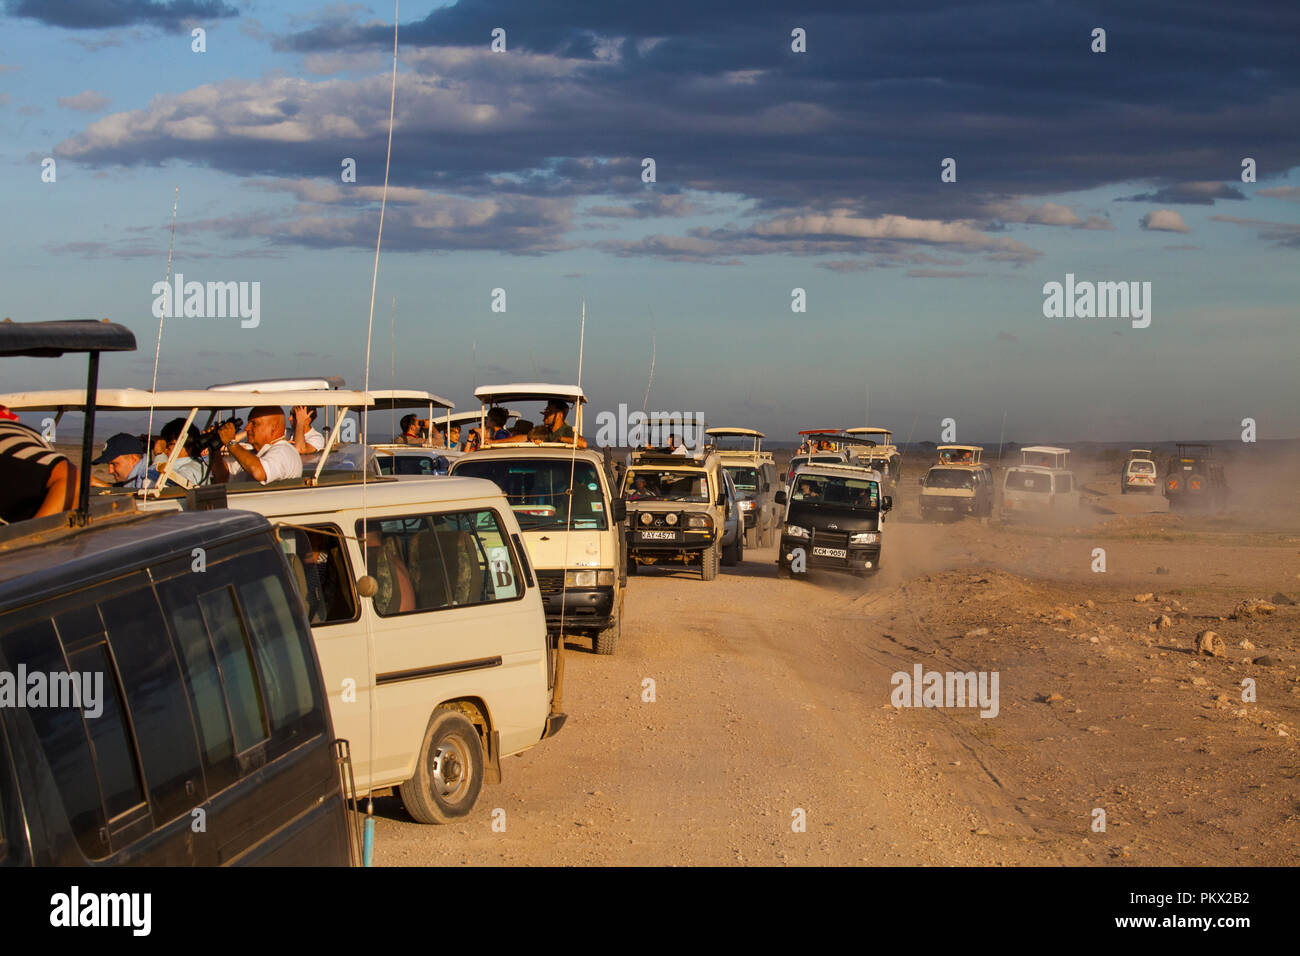 AMBOSELI NATIONAL PARK, KENYA - FEBRUARY 22, 2018: Traffic jam in Amboseli - the tourists watching the lions family from a safari car. Stock Photo